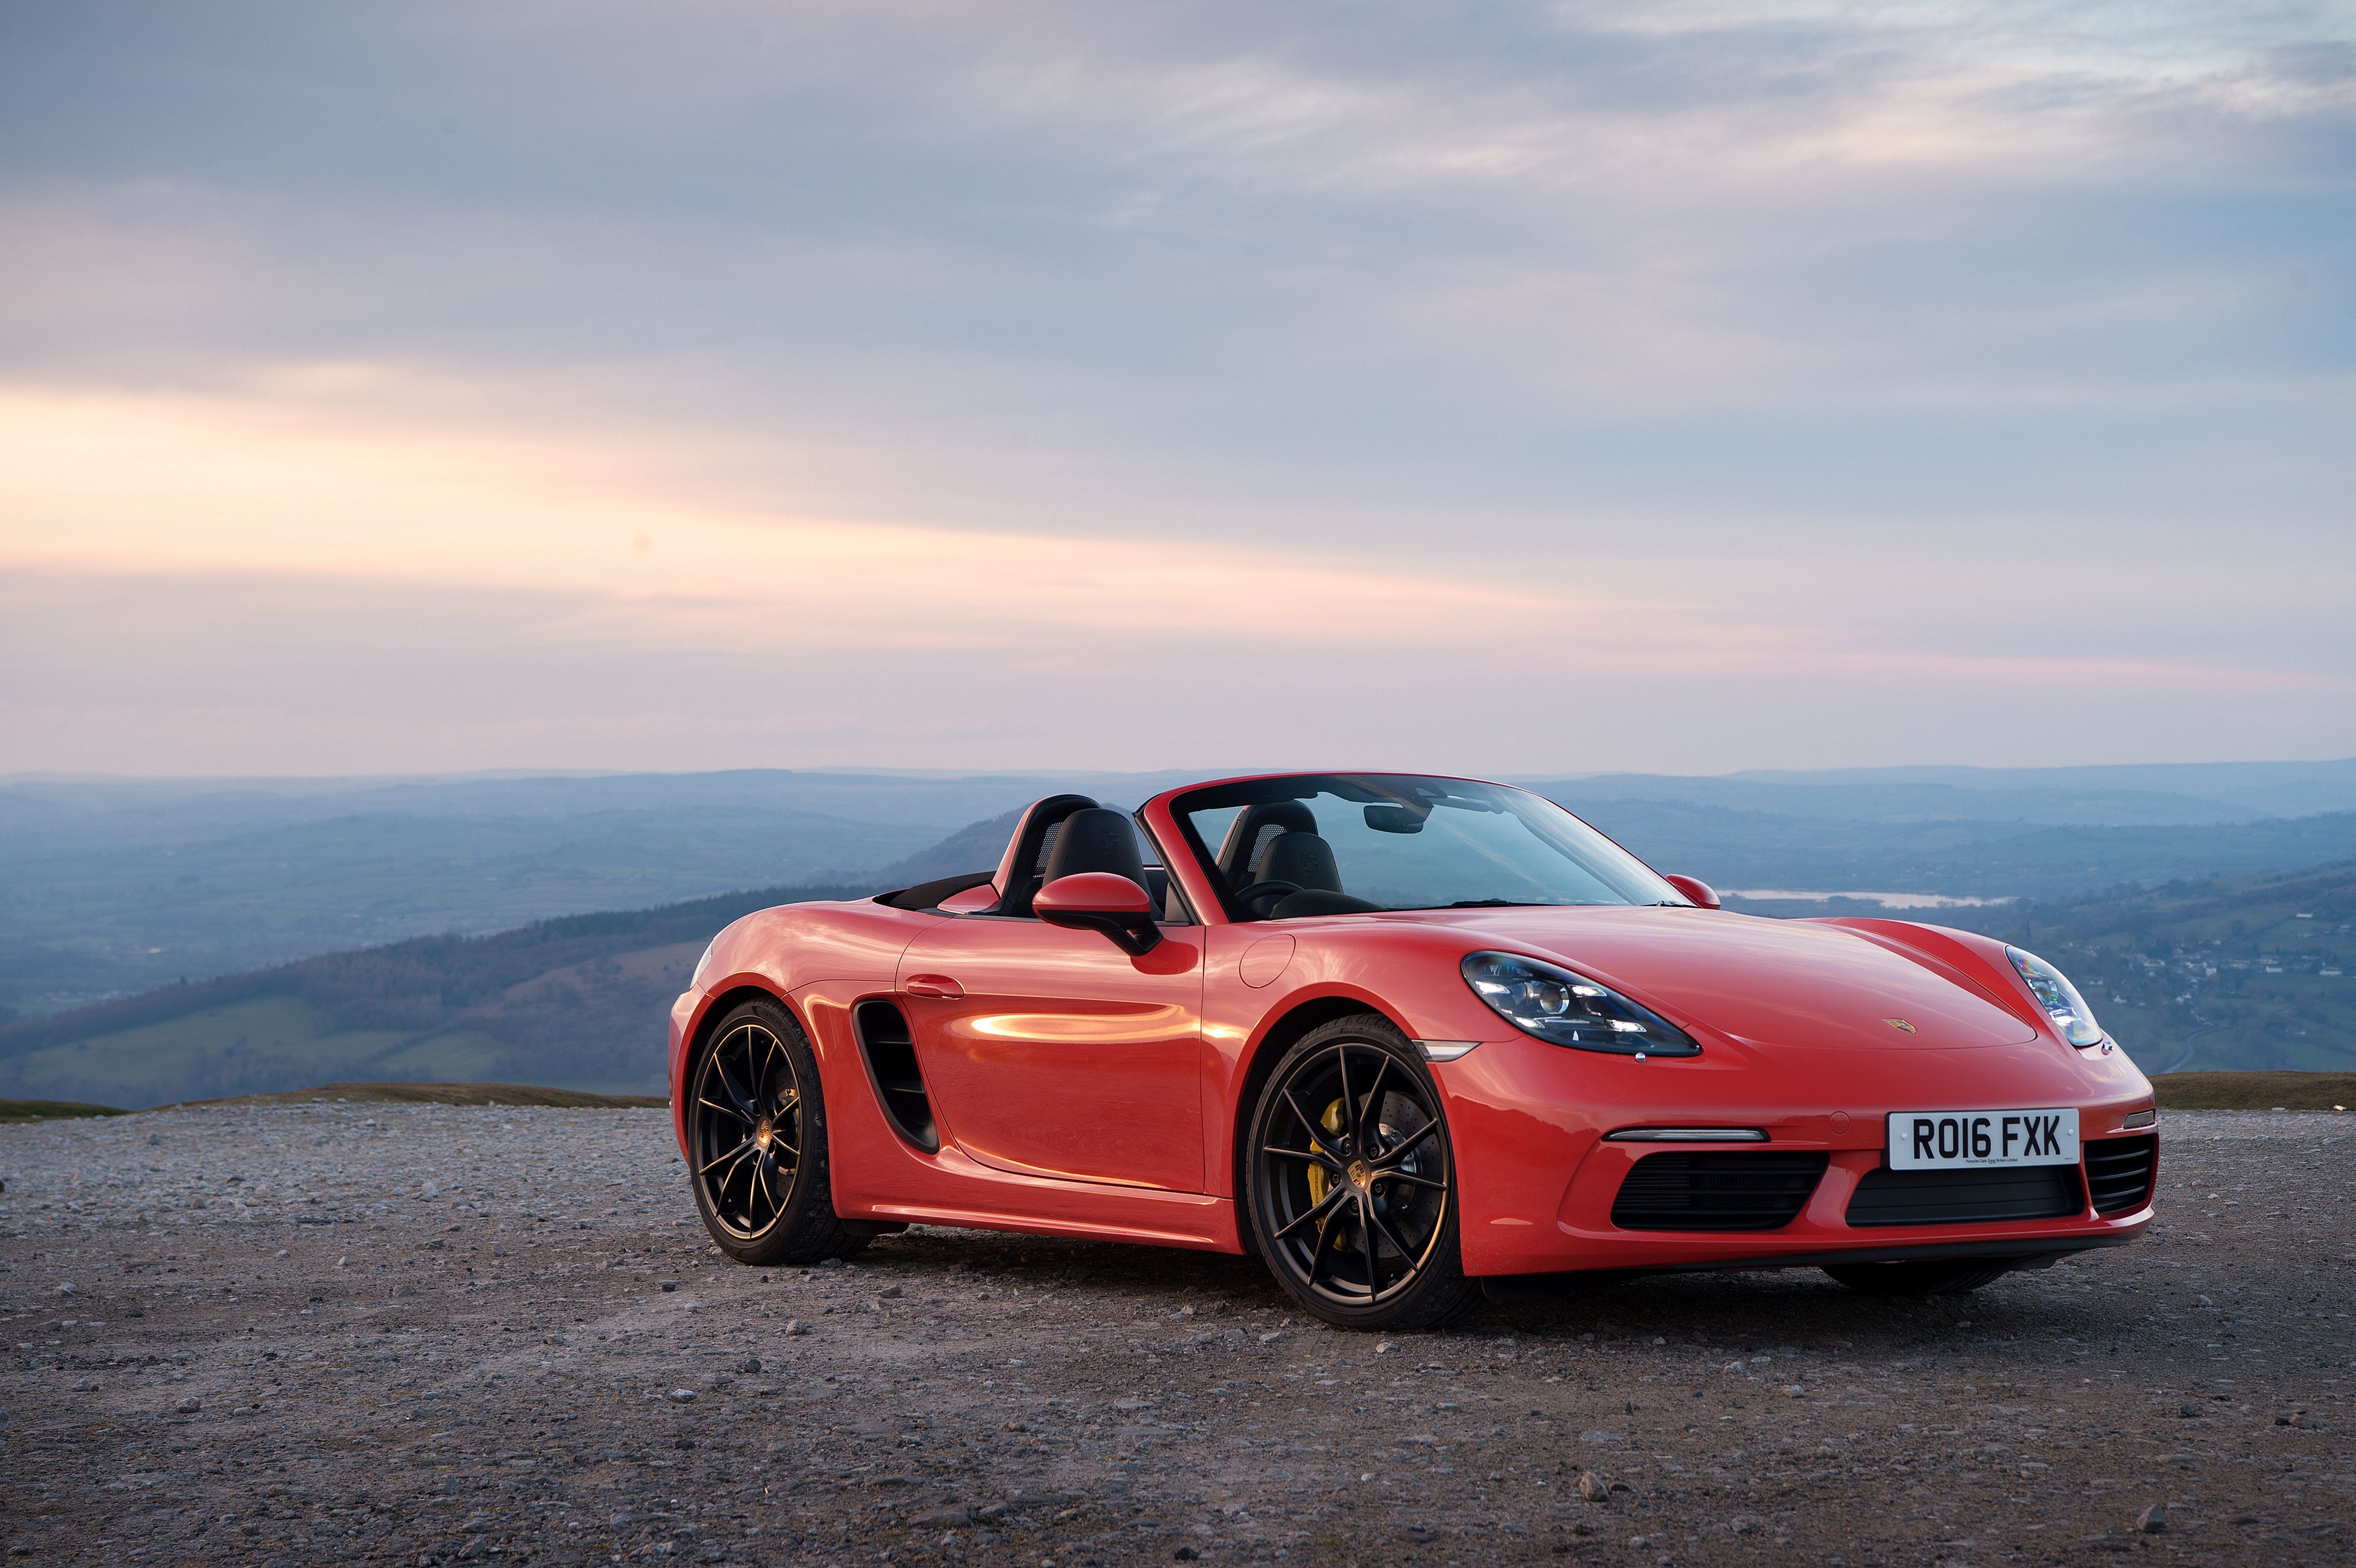 Red Car Convertible Porsche 718 Boxster on the background